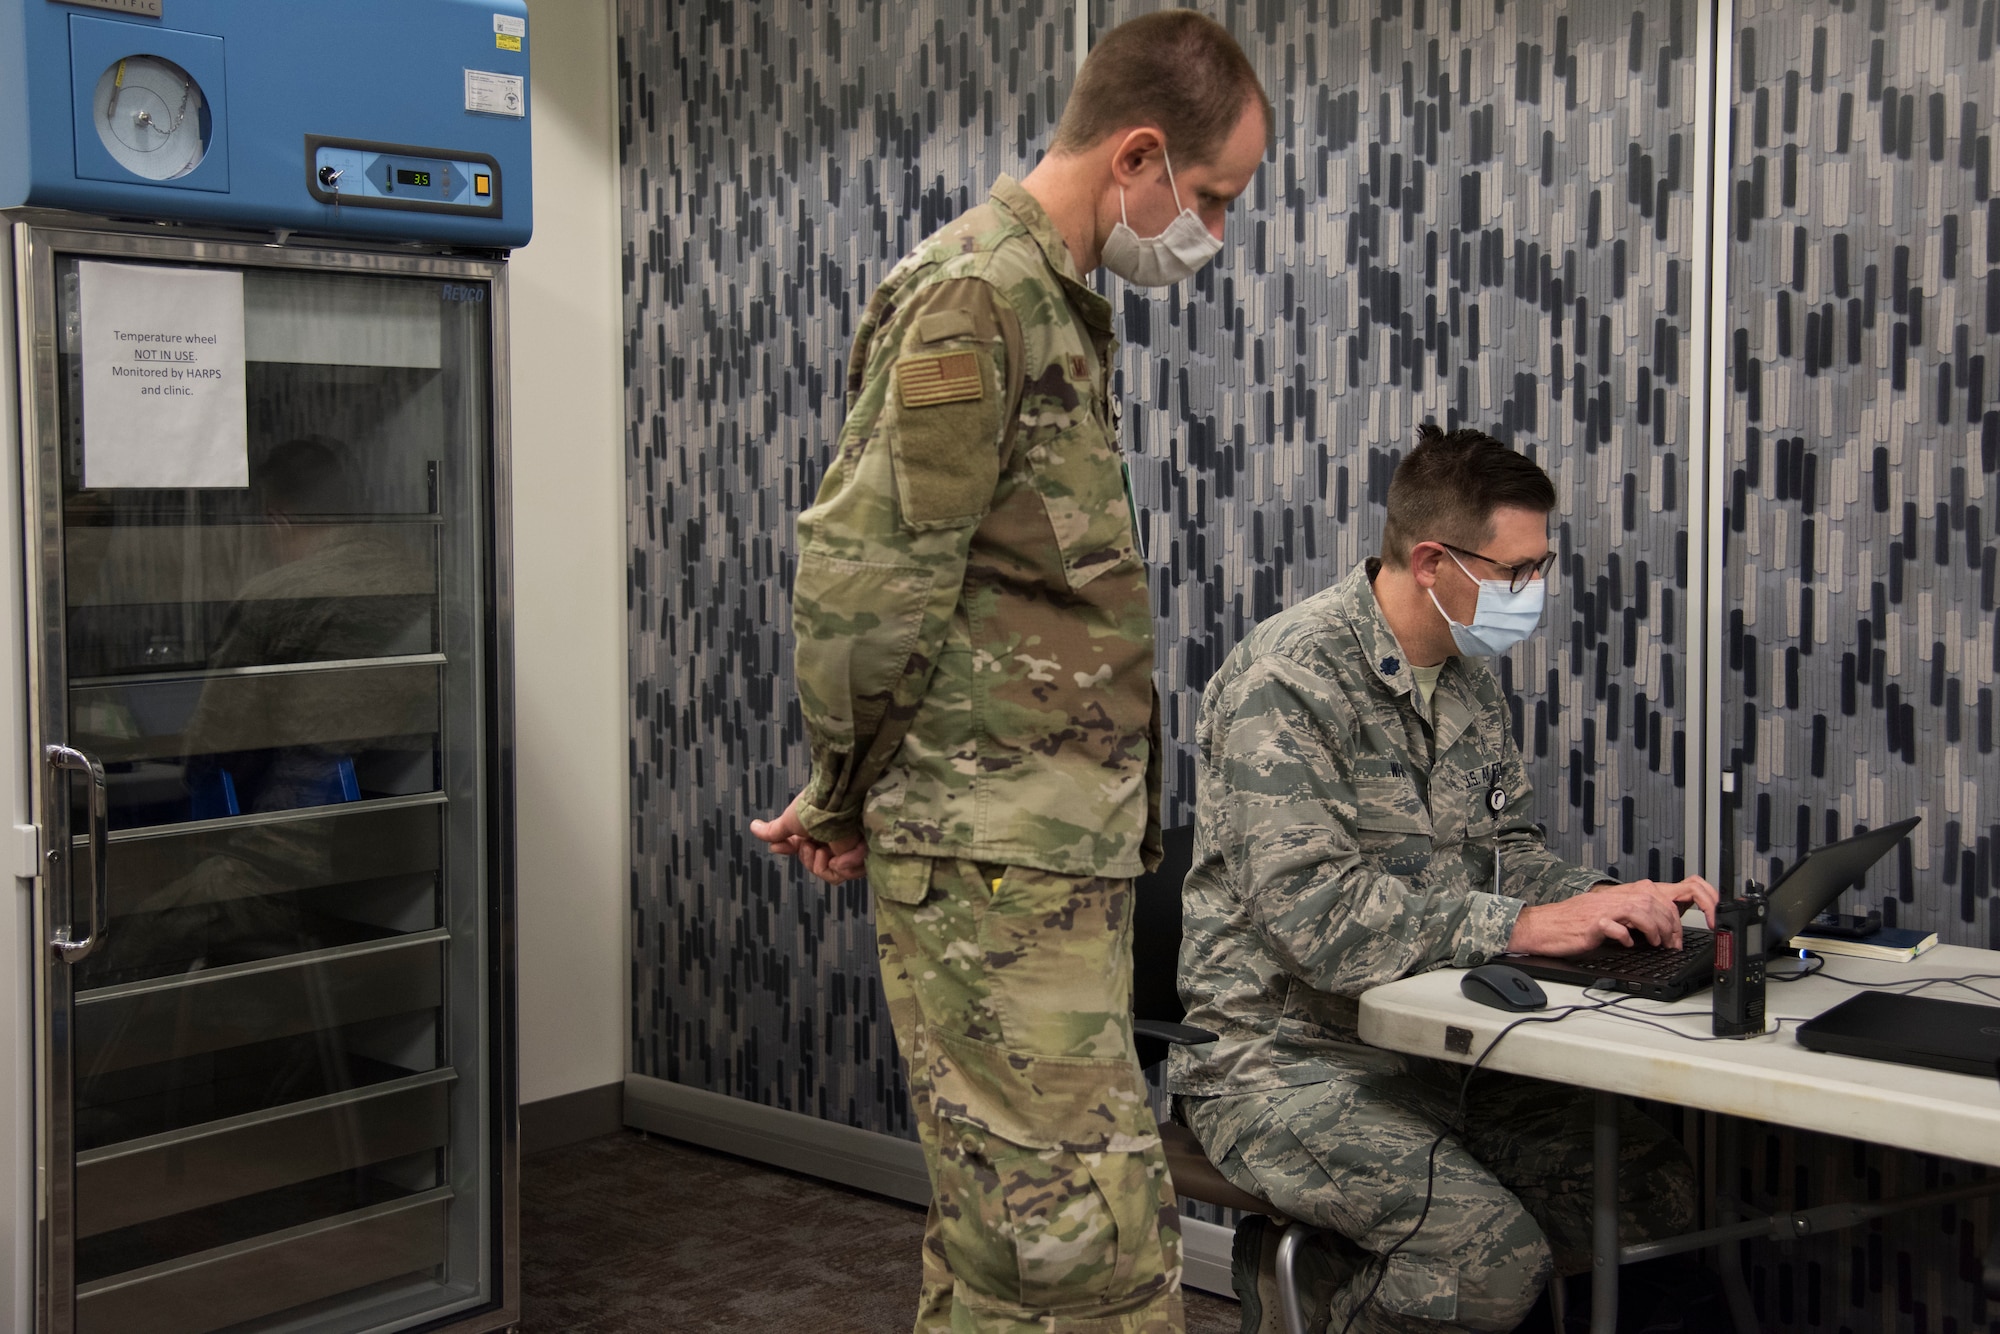 The Department of Defense is conducting a coordinated vaccine distribution strategy that will strengthen the ability to protect people, maintain readiness, support the national COVID-19 response, and trust in safe and effective vaccines and a vaccination plan.